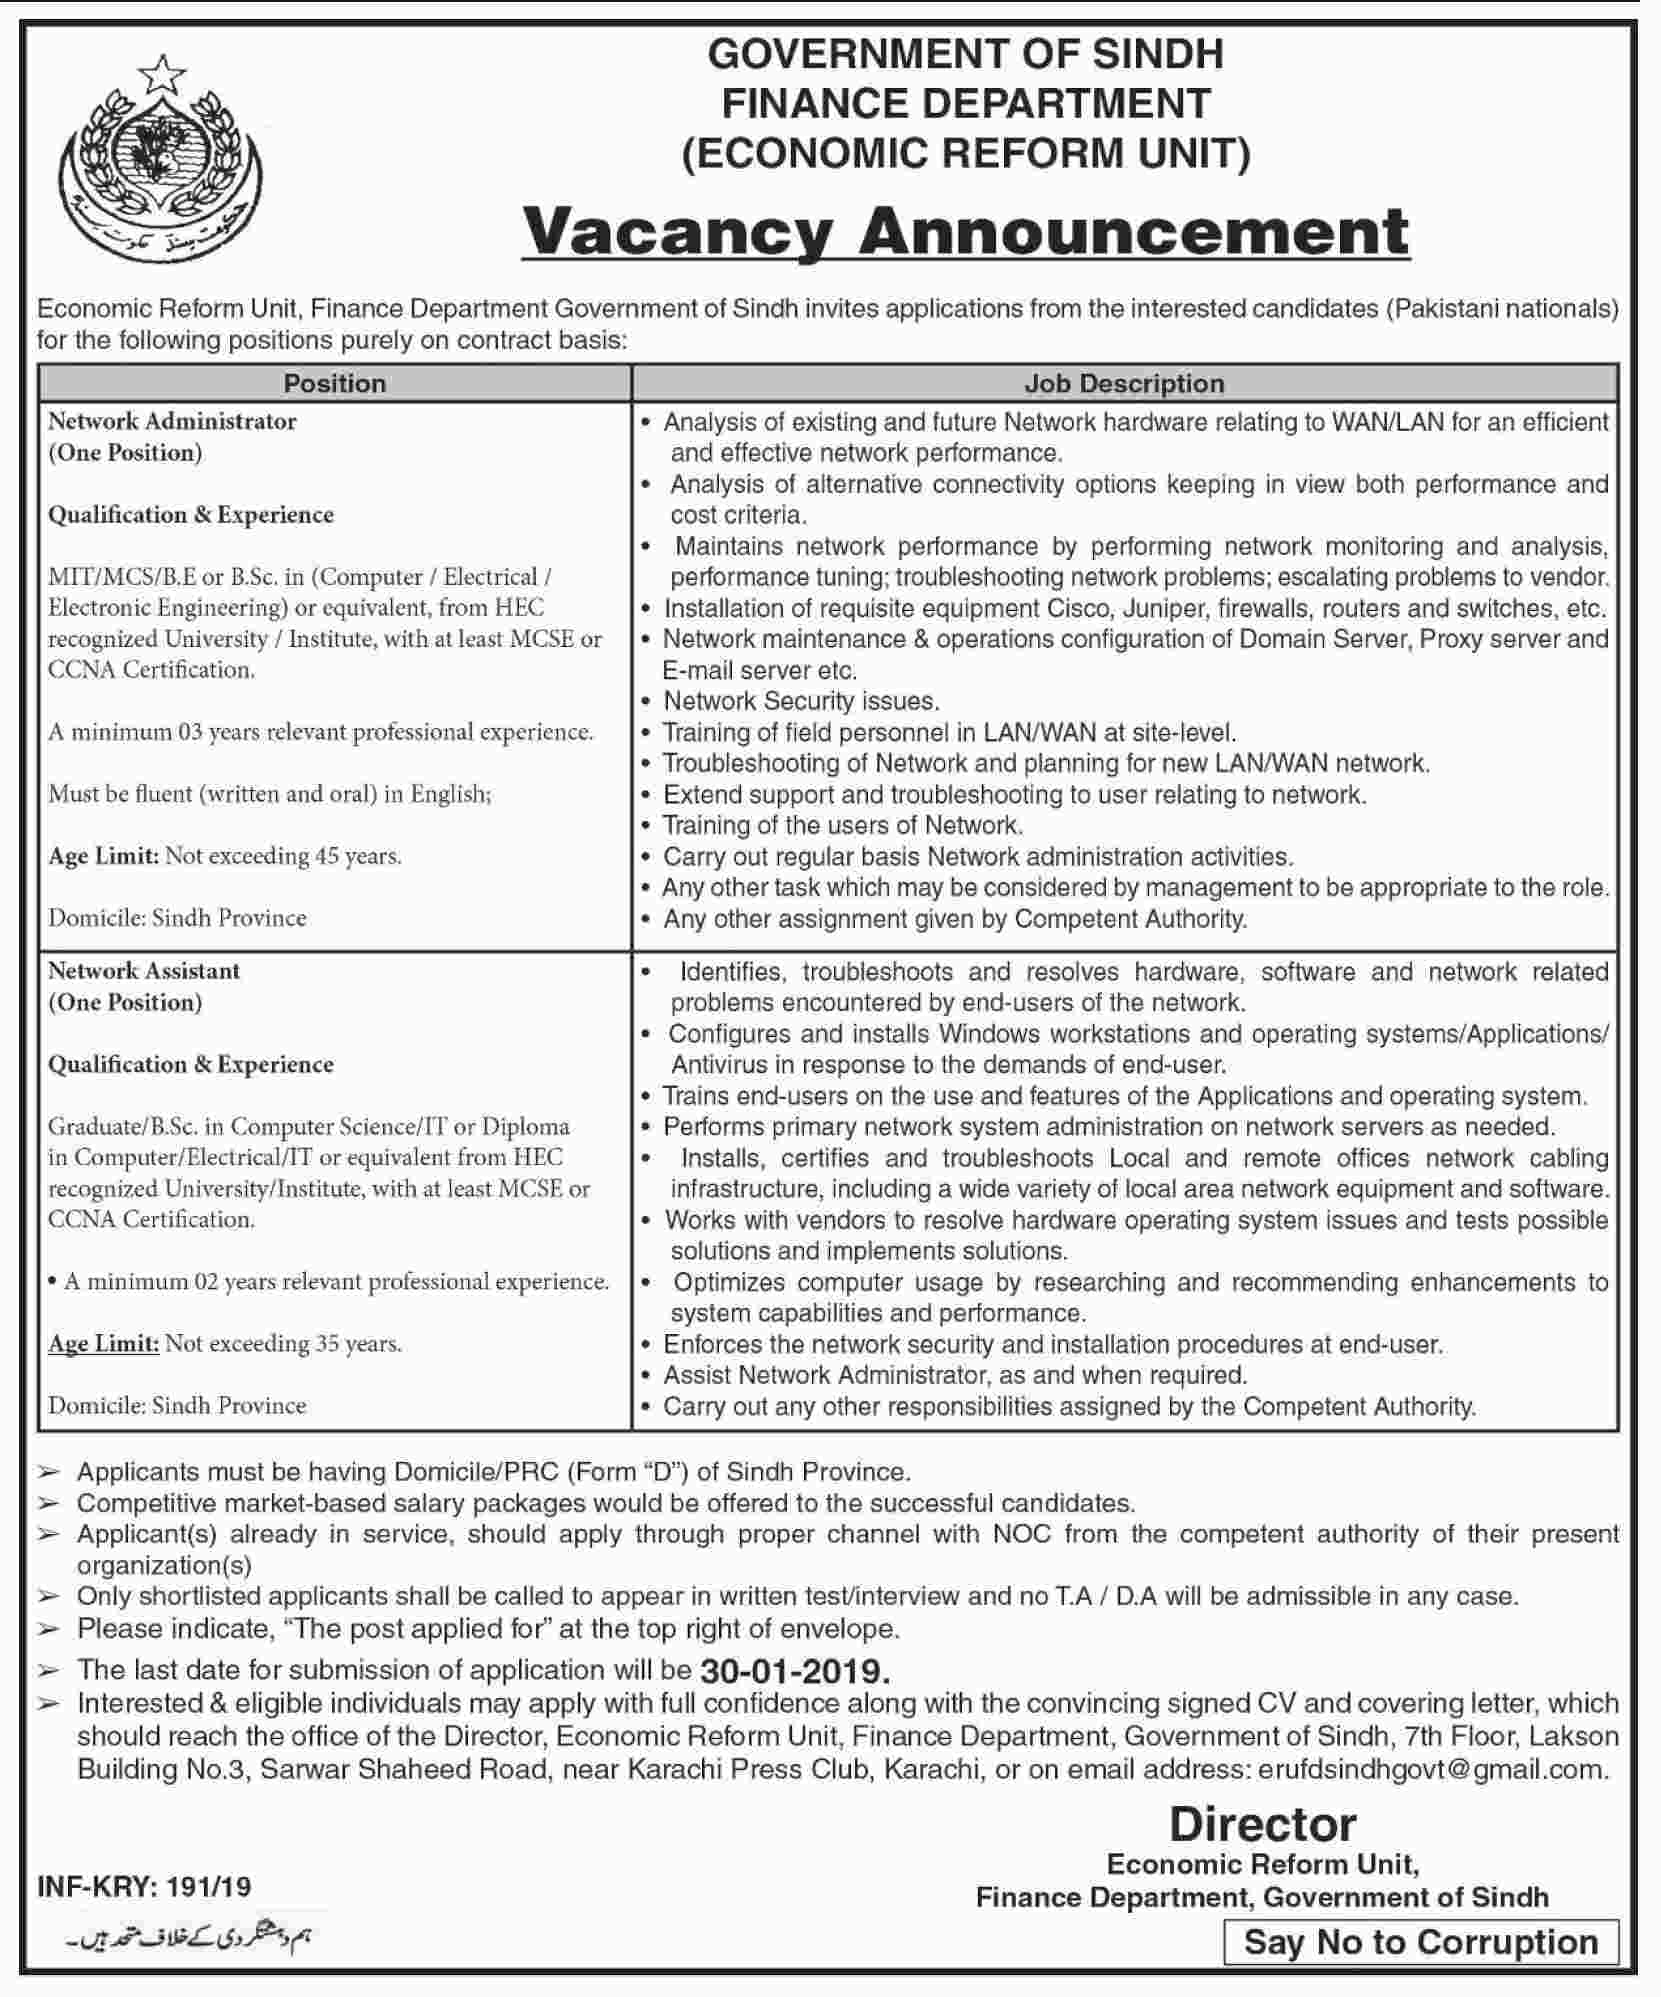  GOVERNMENT OF SINDH FINANCE DEPARTMENT JOBS